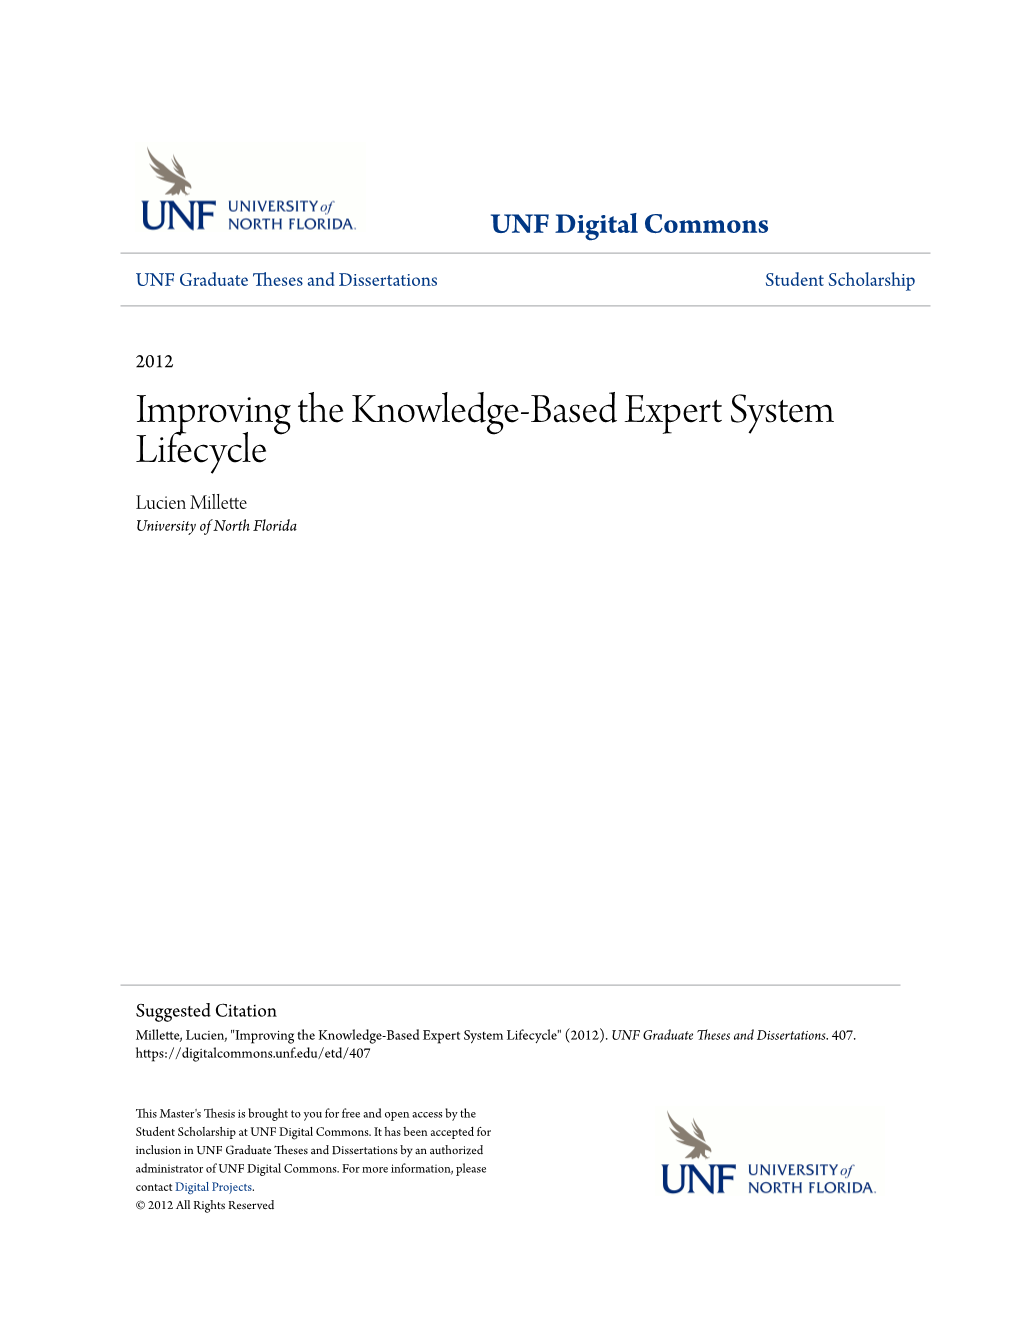 Improving the Knowledge-Based Expert System Lifecycle Lucien Millette University of North Florida